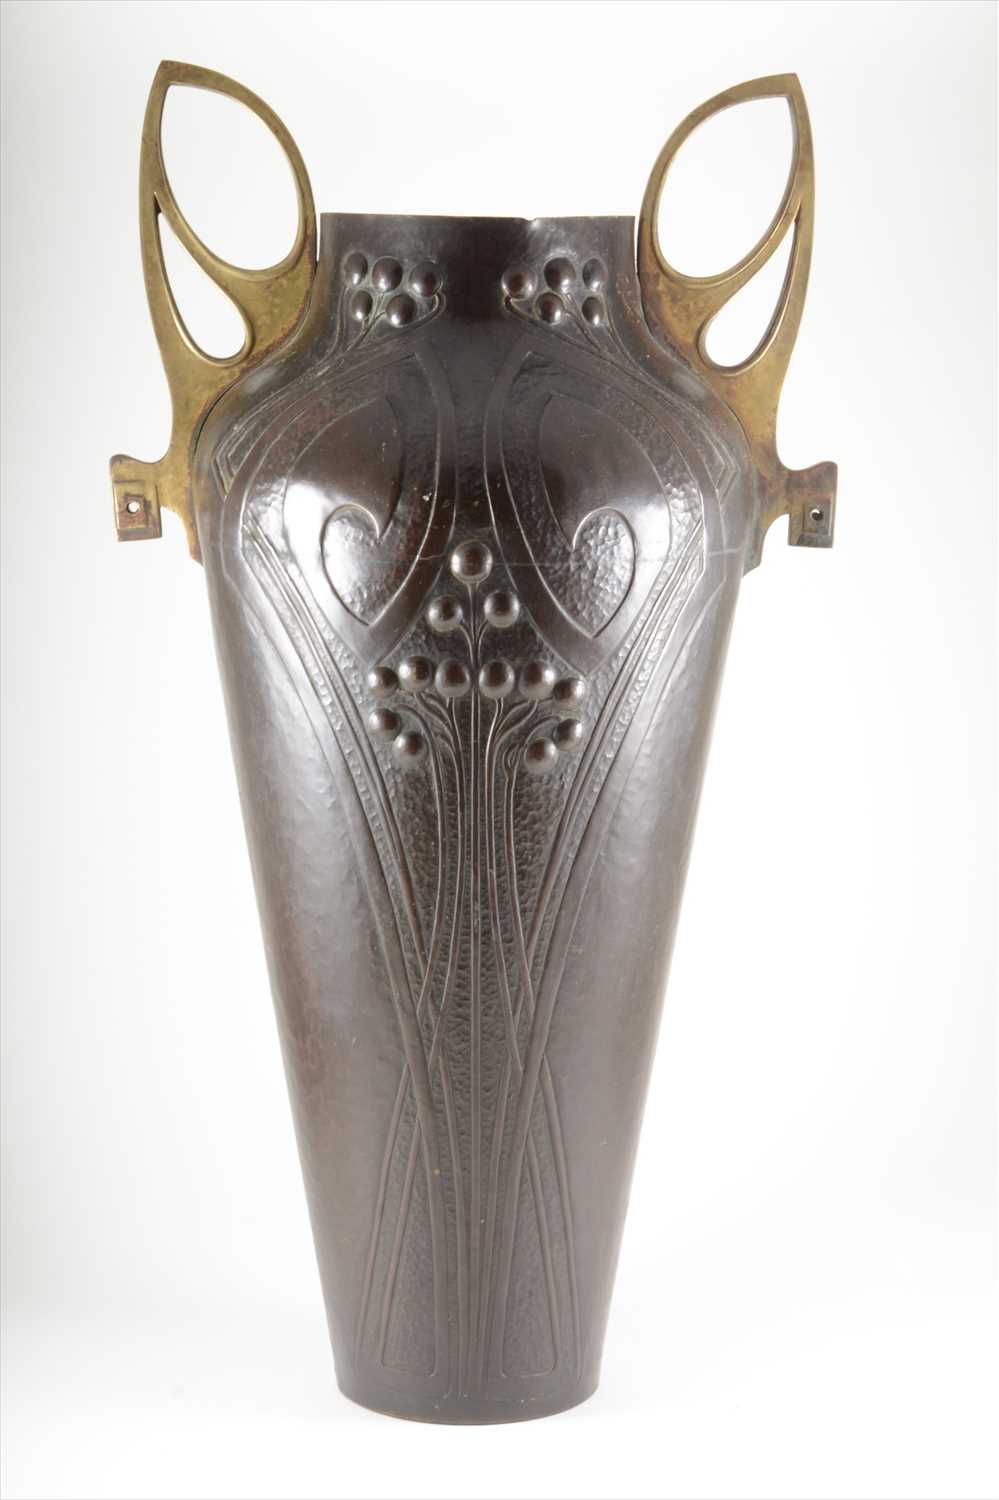 Lot 87 - A large Secessionist twin-handled vase, designed by Albert Mayer for WMF.